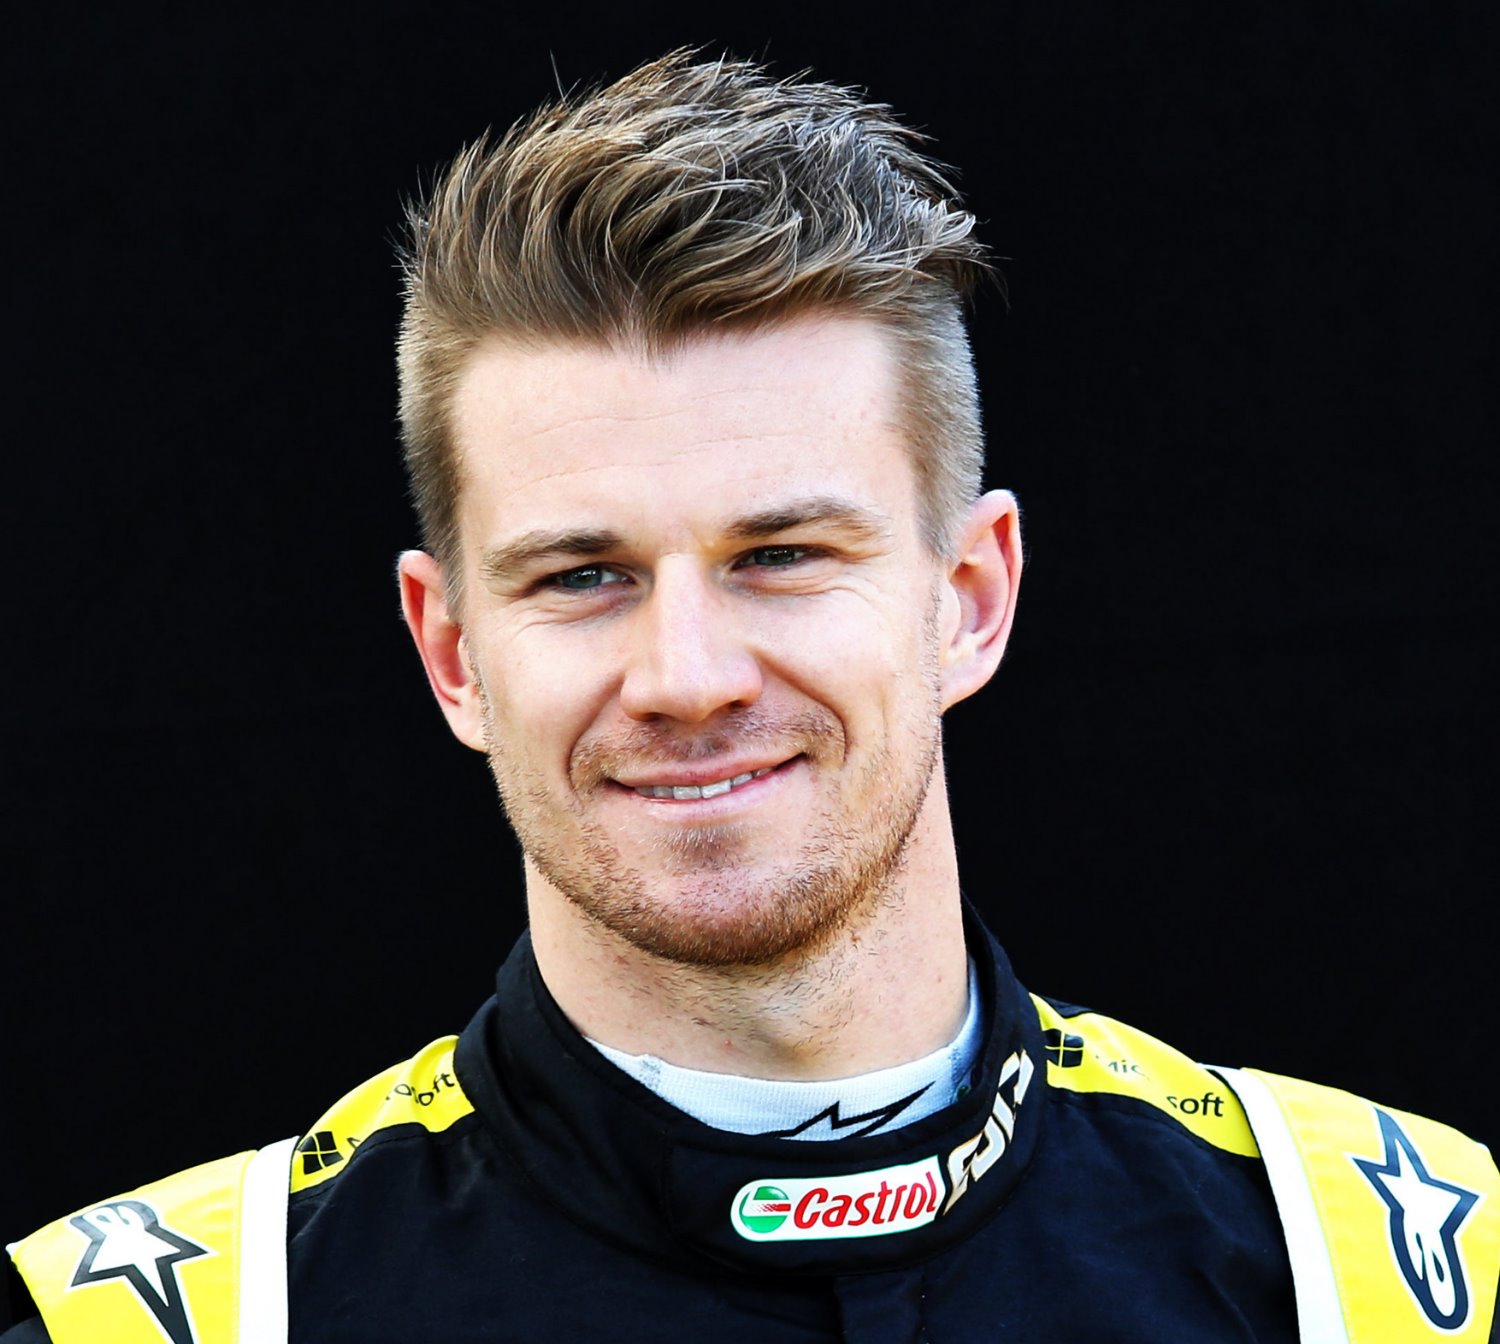 Nico Hulkenberg needs to get real about an F1 return